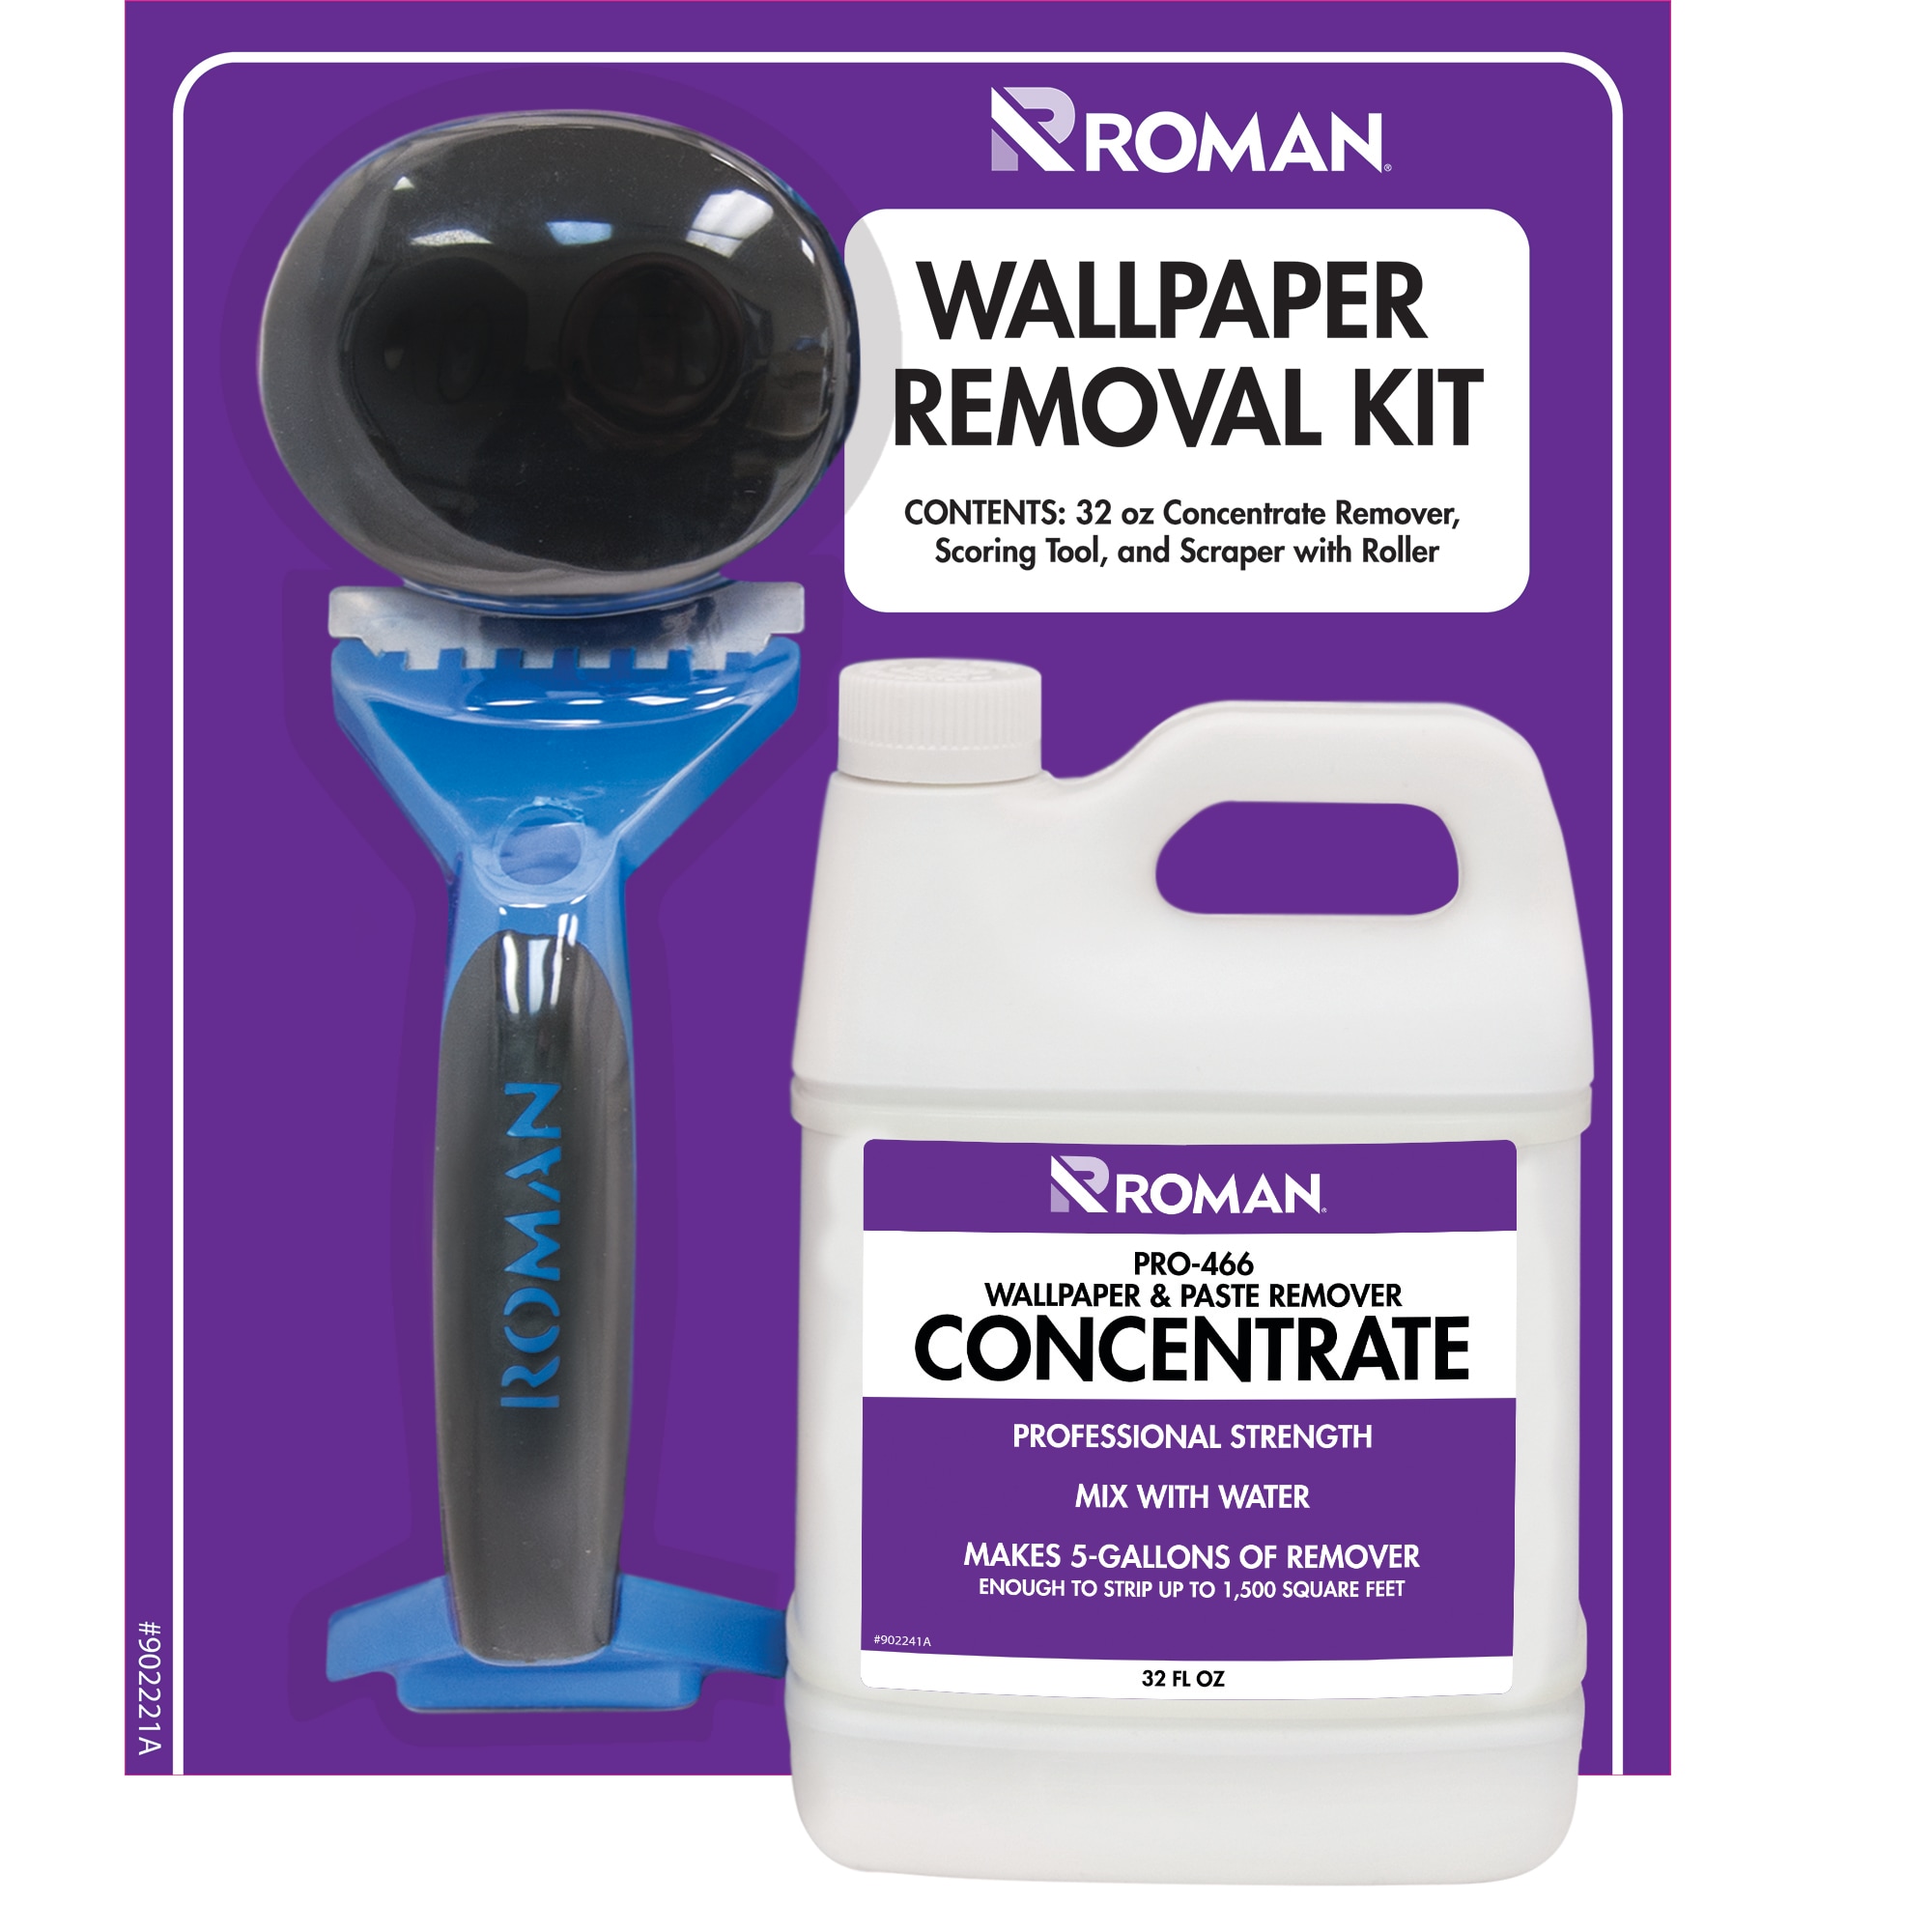 New wallpaper remover gel and paper tiger remover - household items - by  owner - housewares sale - craigslist